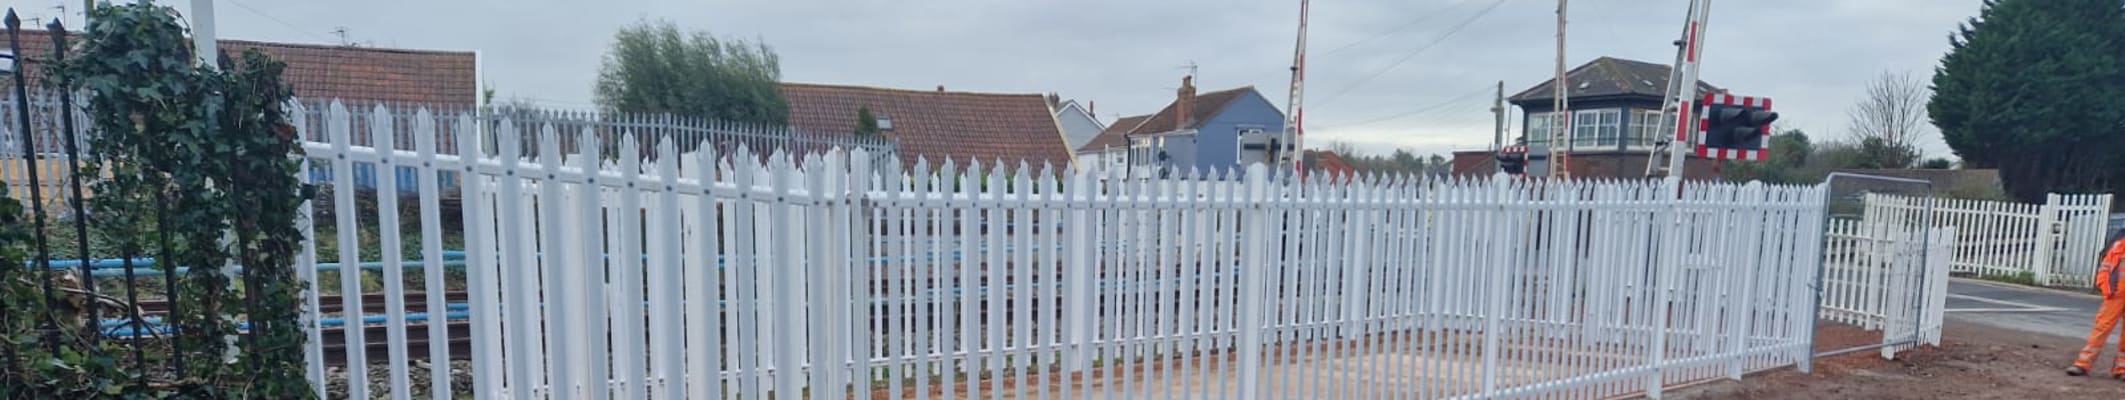 Security Fencing at a level crossing